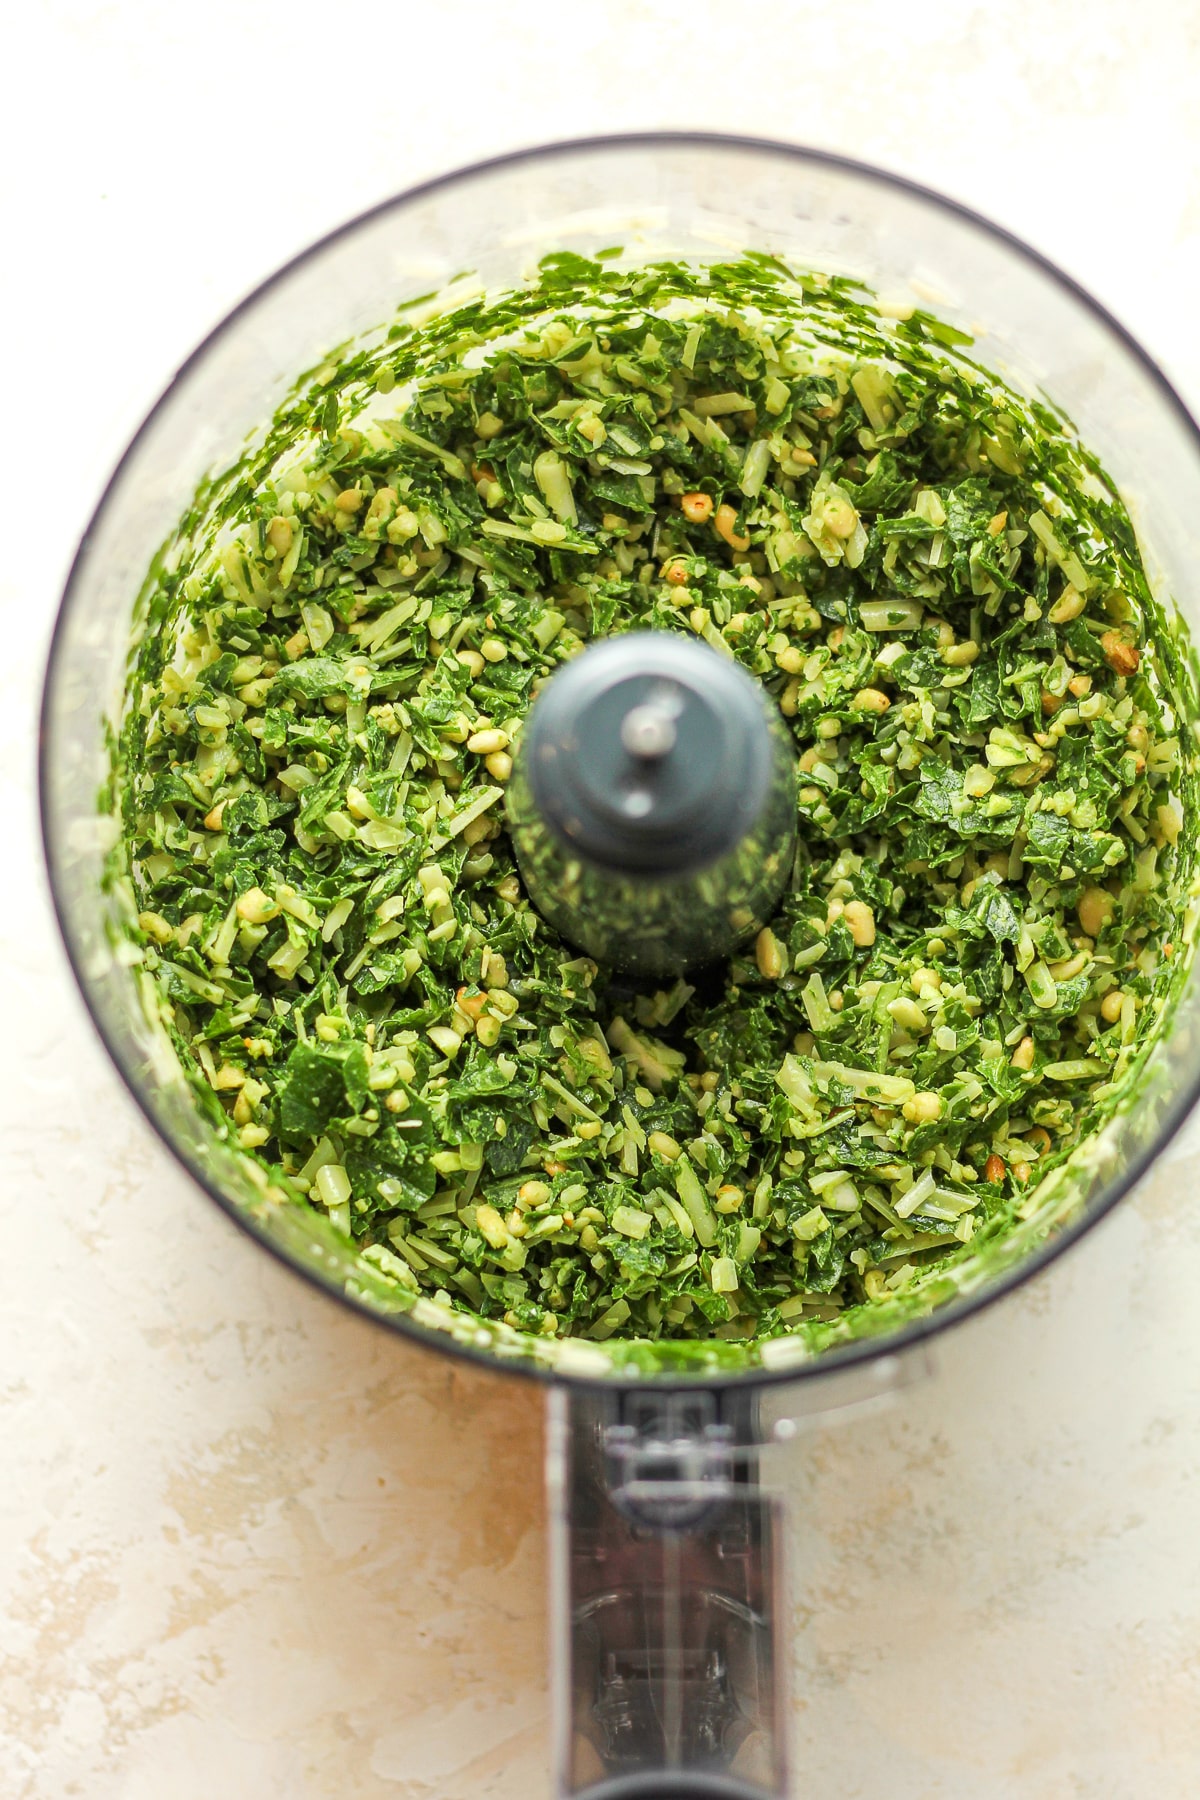 A food processor of the chopped dry pesto ingredients.